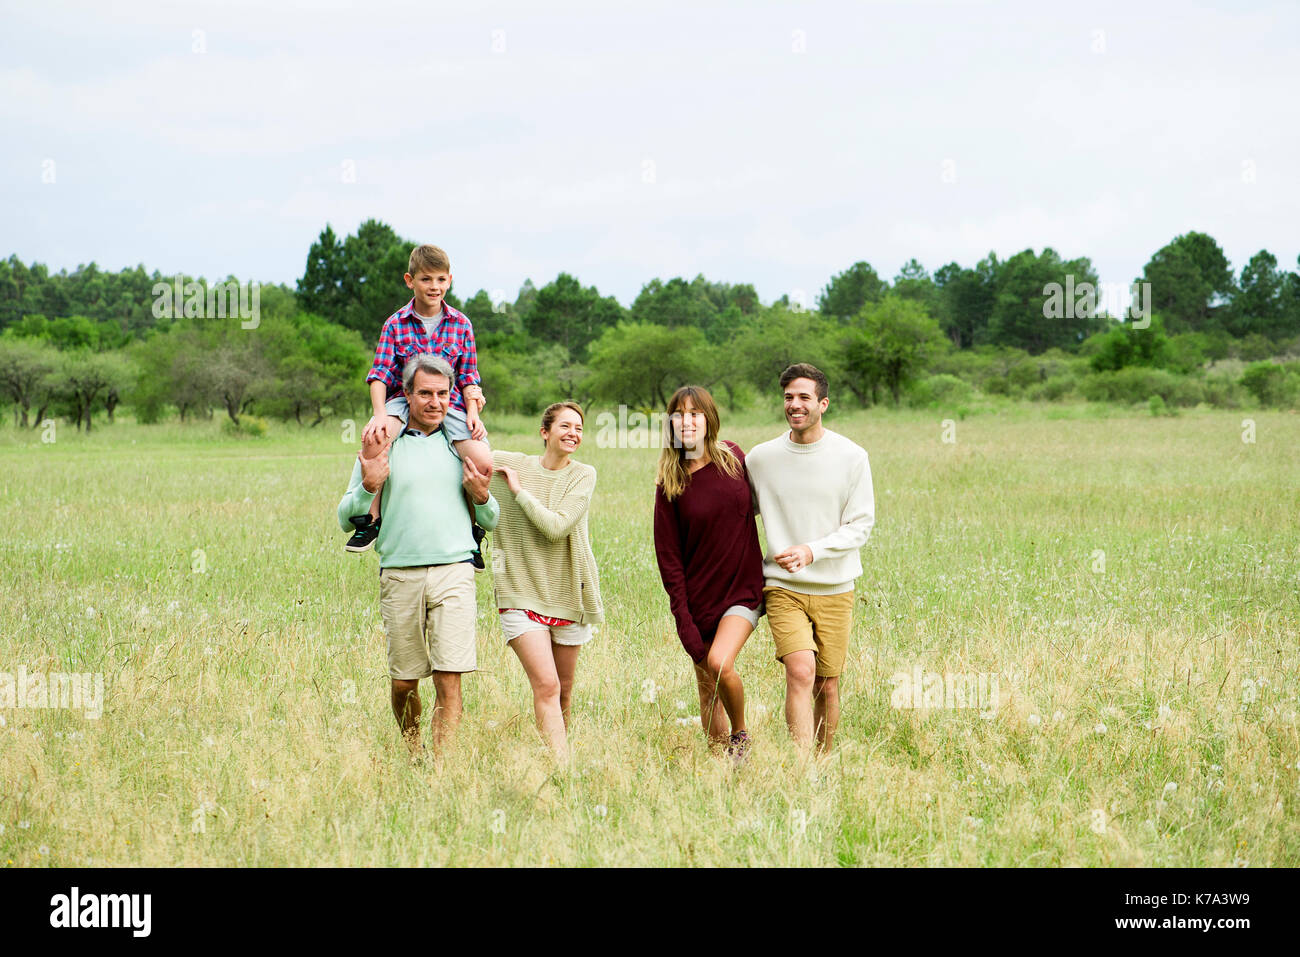 Family walking together through field Stock Photo